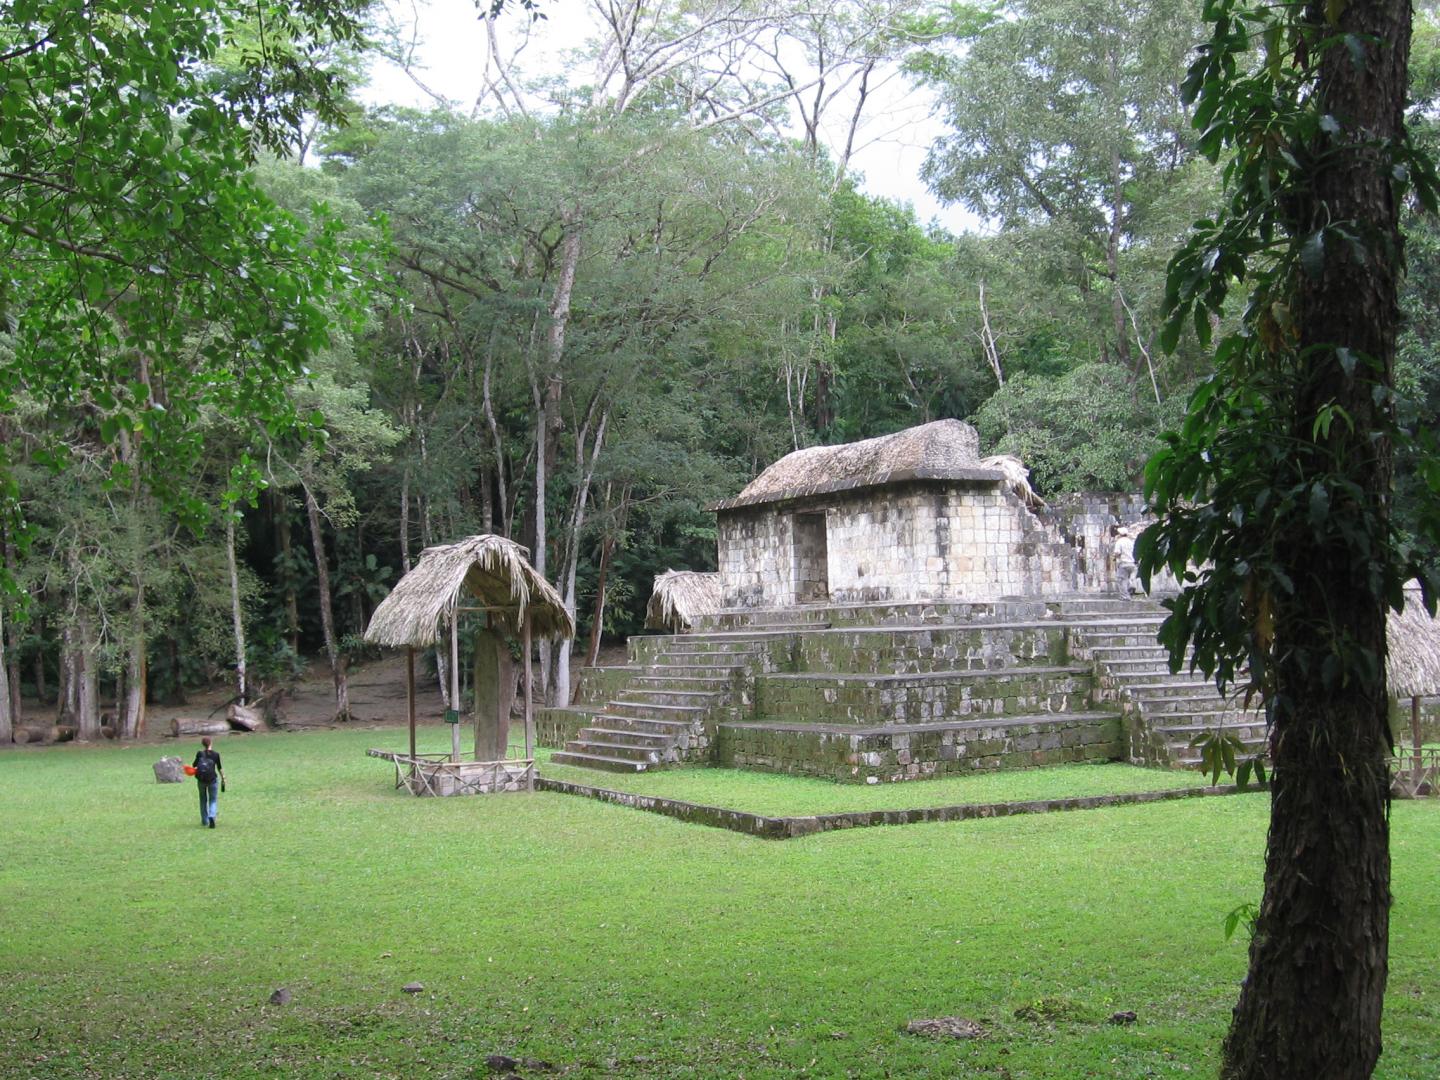 The Central Plaza of Ceibal, Guatemala.